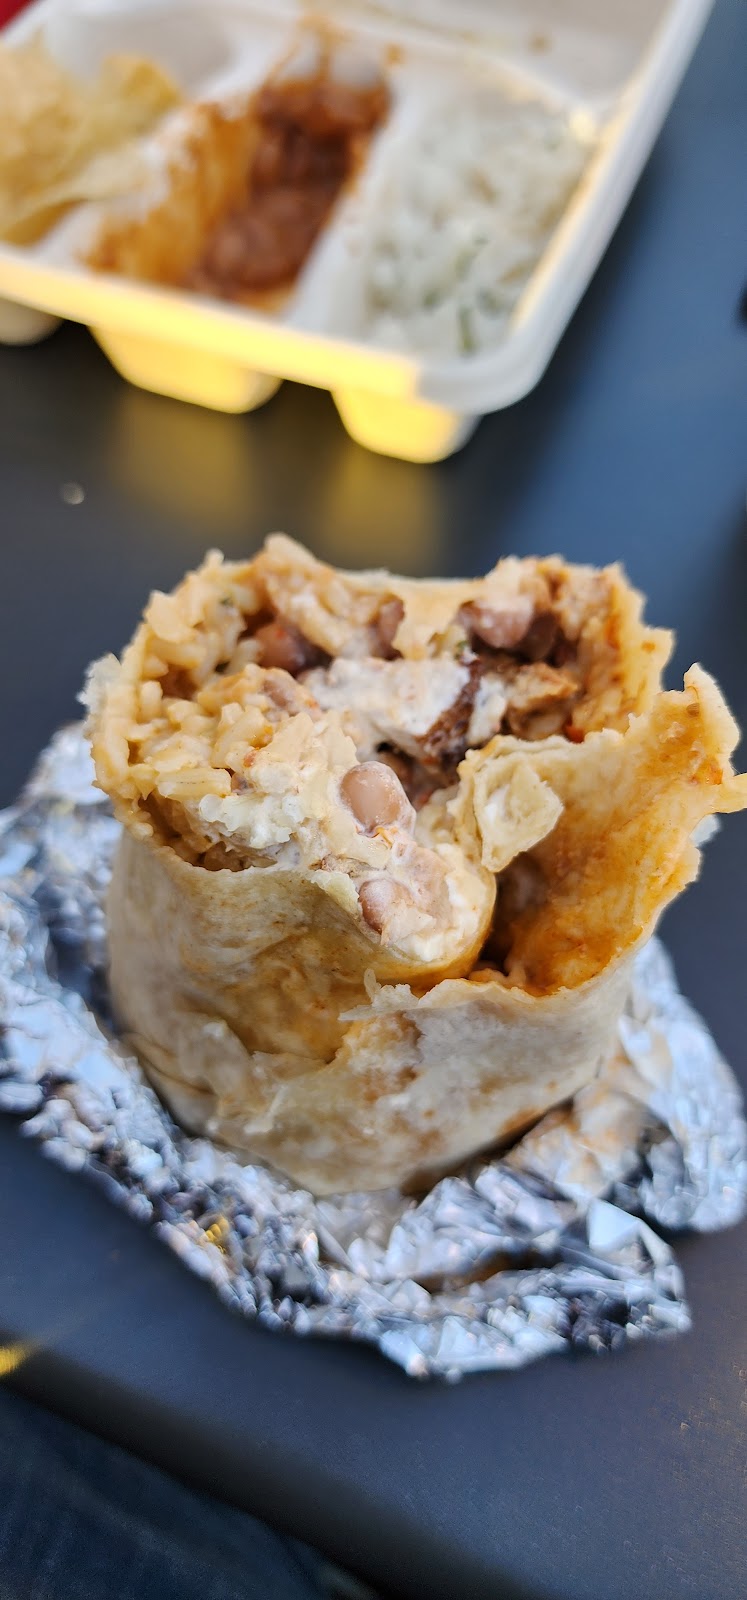 Chipotle Mexican Grill | 655 S Cotton Ln, Goodyear, AZ 85338, USA | Phone: (602) 601-2987